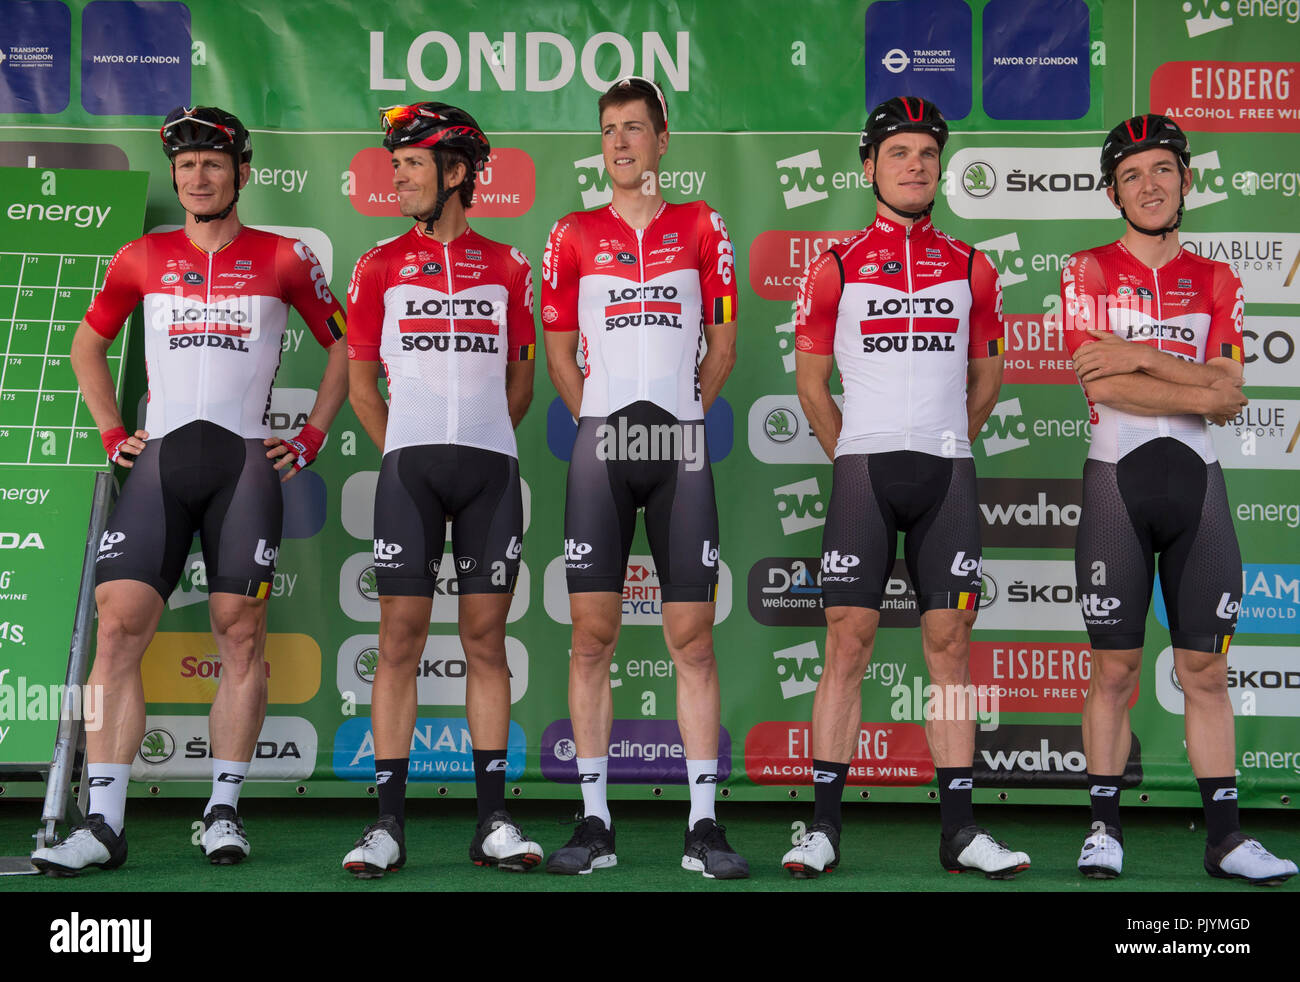 London, UK. 9 September, 2018. The OVO Energy Tour of Britain London Stage 8 concludes with a 14 lap circuit in central London on closed roads in front of large crowds and covering 77km at speeds of up to 80kph, starting and finishing on Regent Street St James’s close to Piccadilly Circus. Team Lotto Soudal are introduced to the crowds before race start. Credit: Malcolm Park/Alamy Live News. Stock Photo